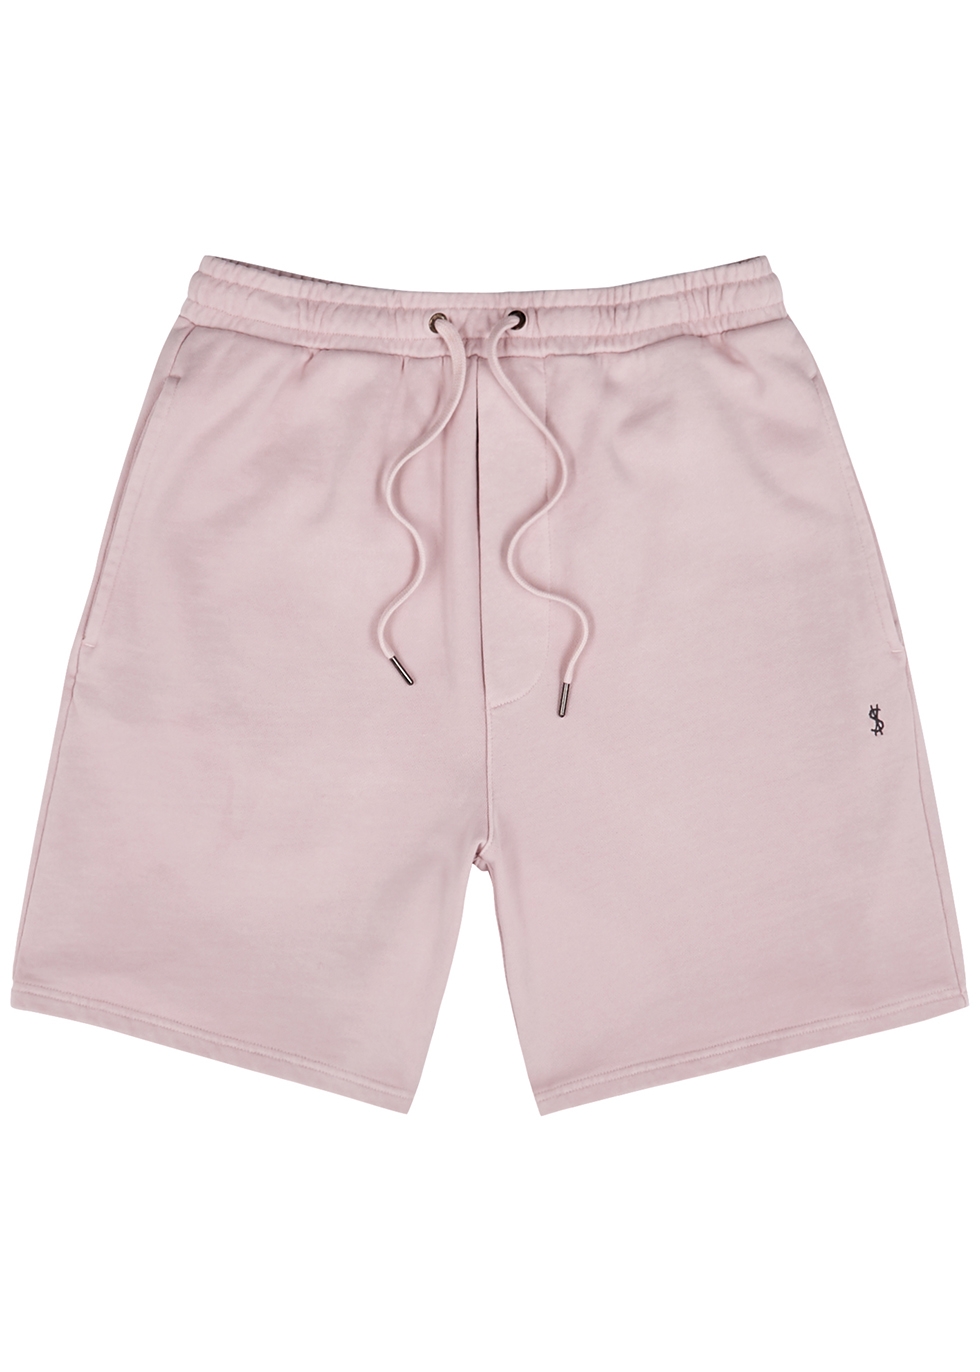 4X4 Trak pink embroidered cotton shorts